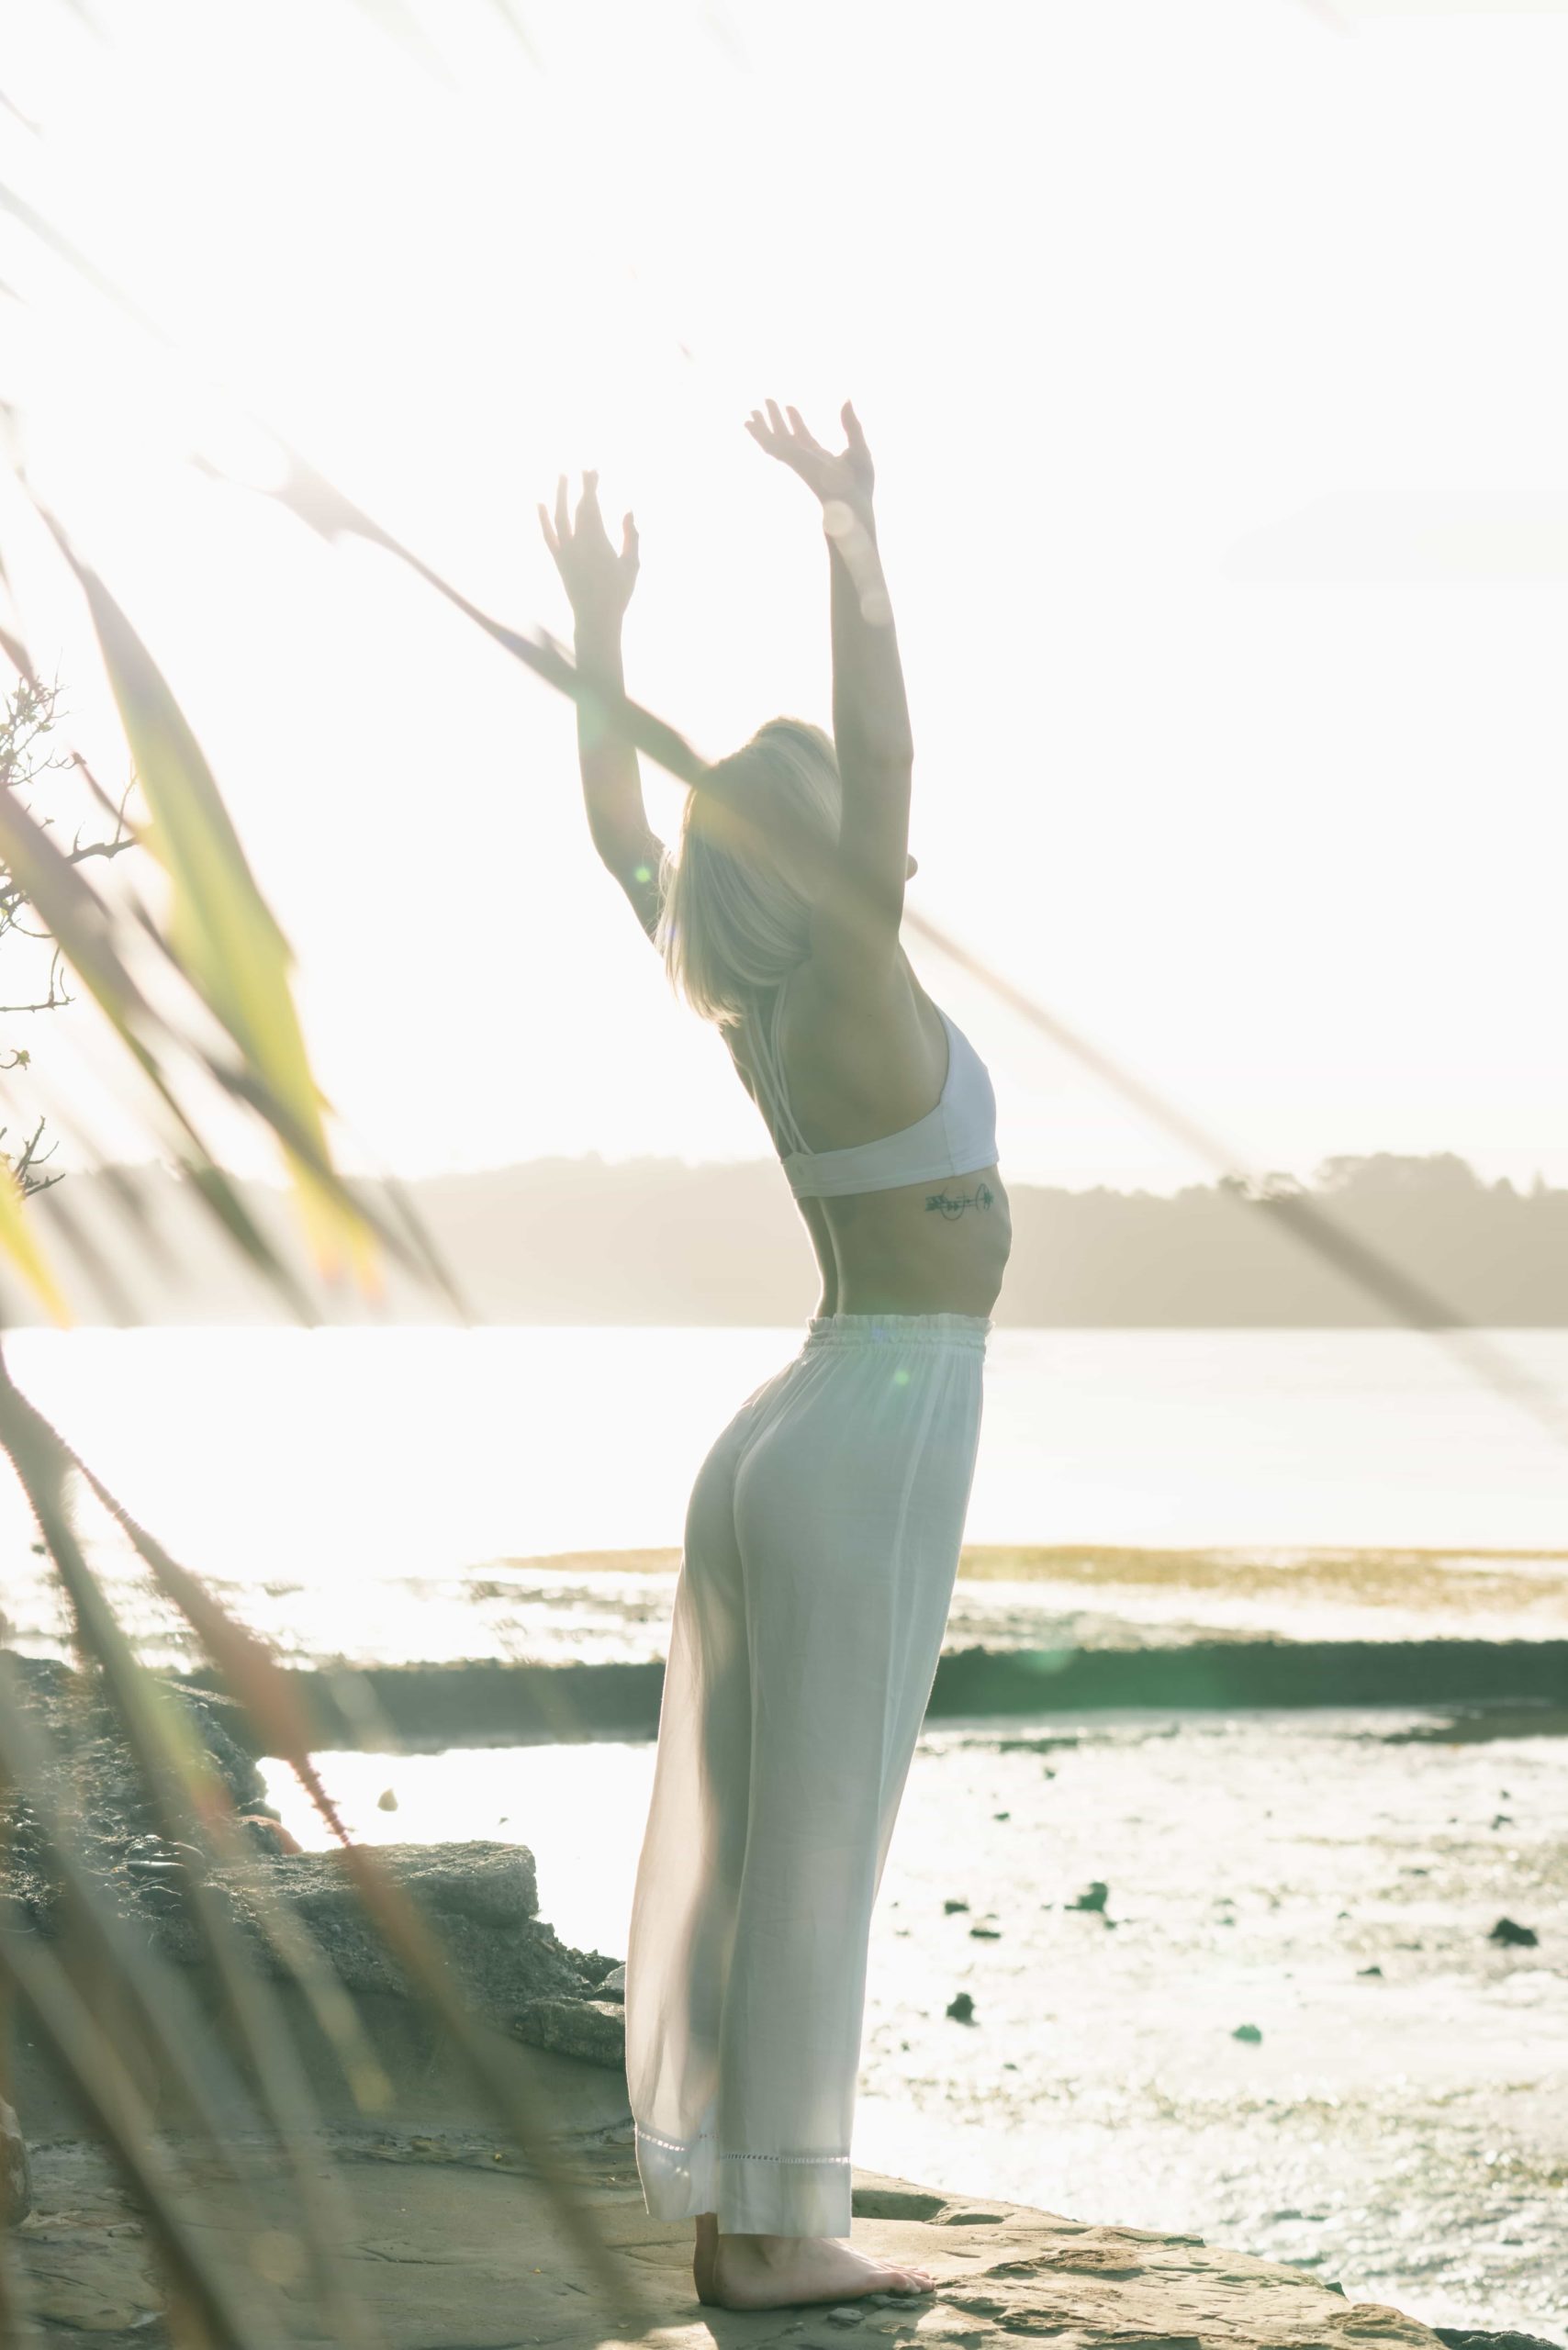 This image portrays a girl nourishing her spirituality by practicing yoga on a beach.